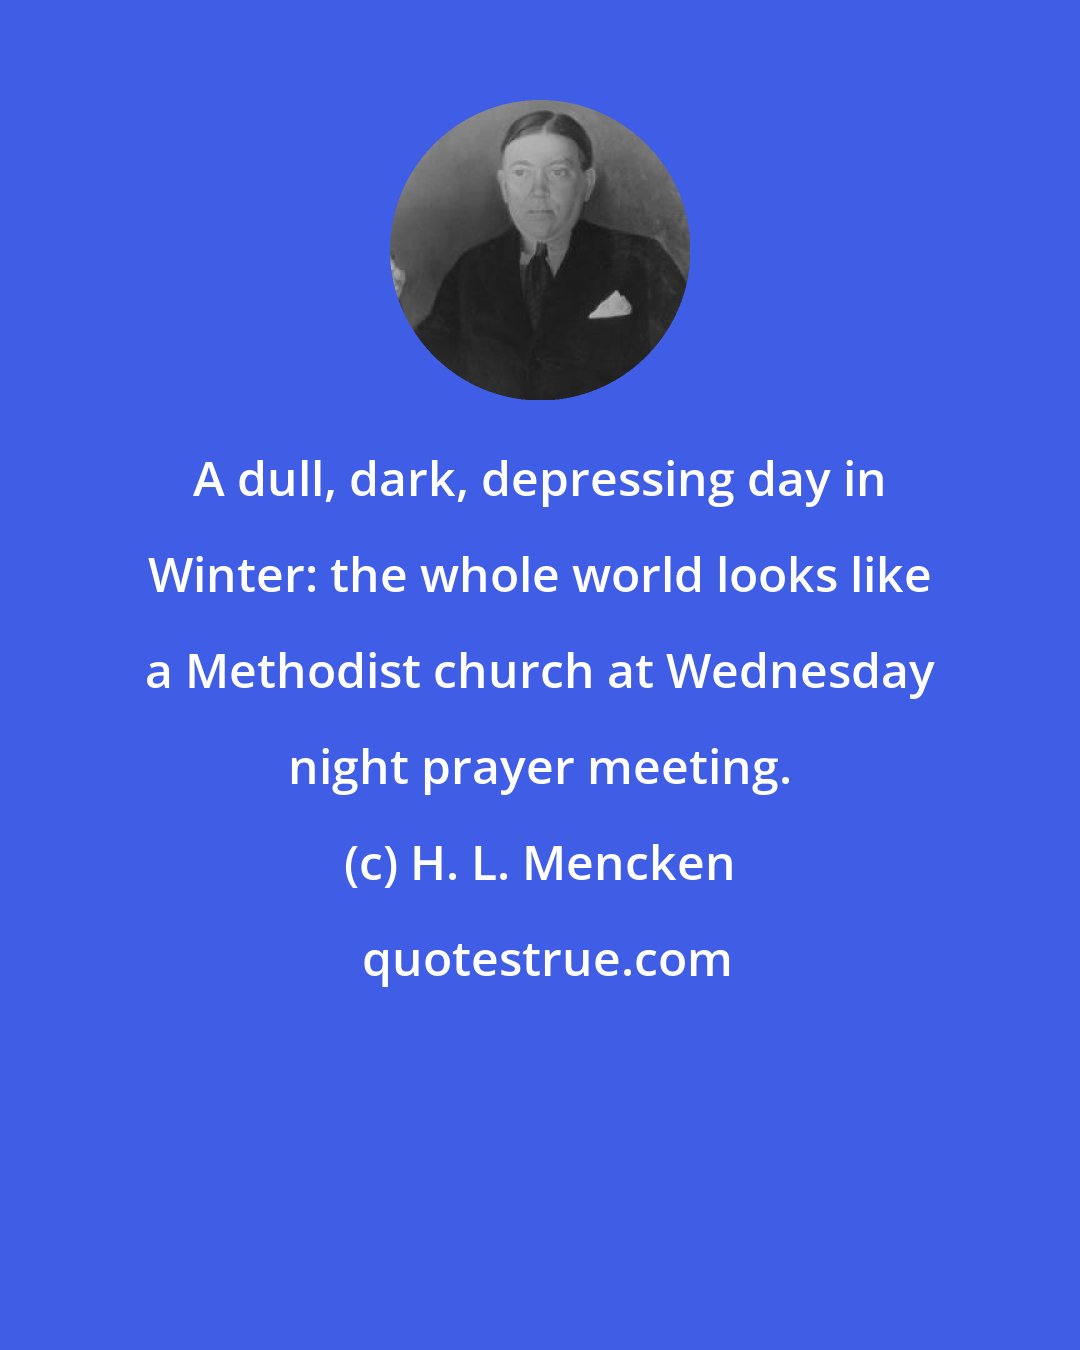 H. L. Mencken: A dull, dark, depressing day in Winter: the whole world looks like a Methodist church at Wednesday night prayer meeting.